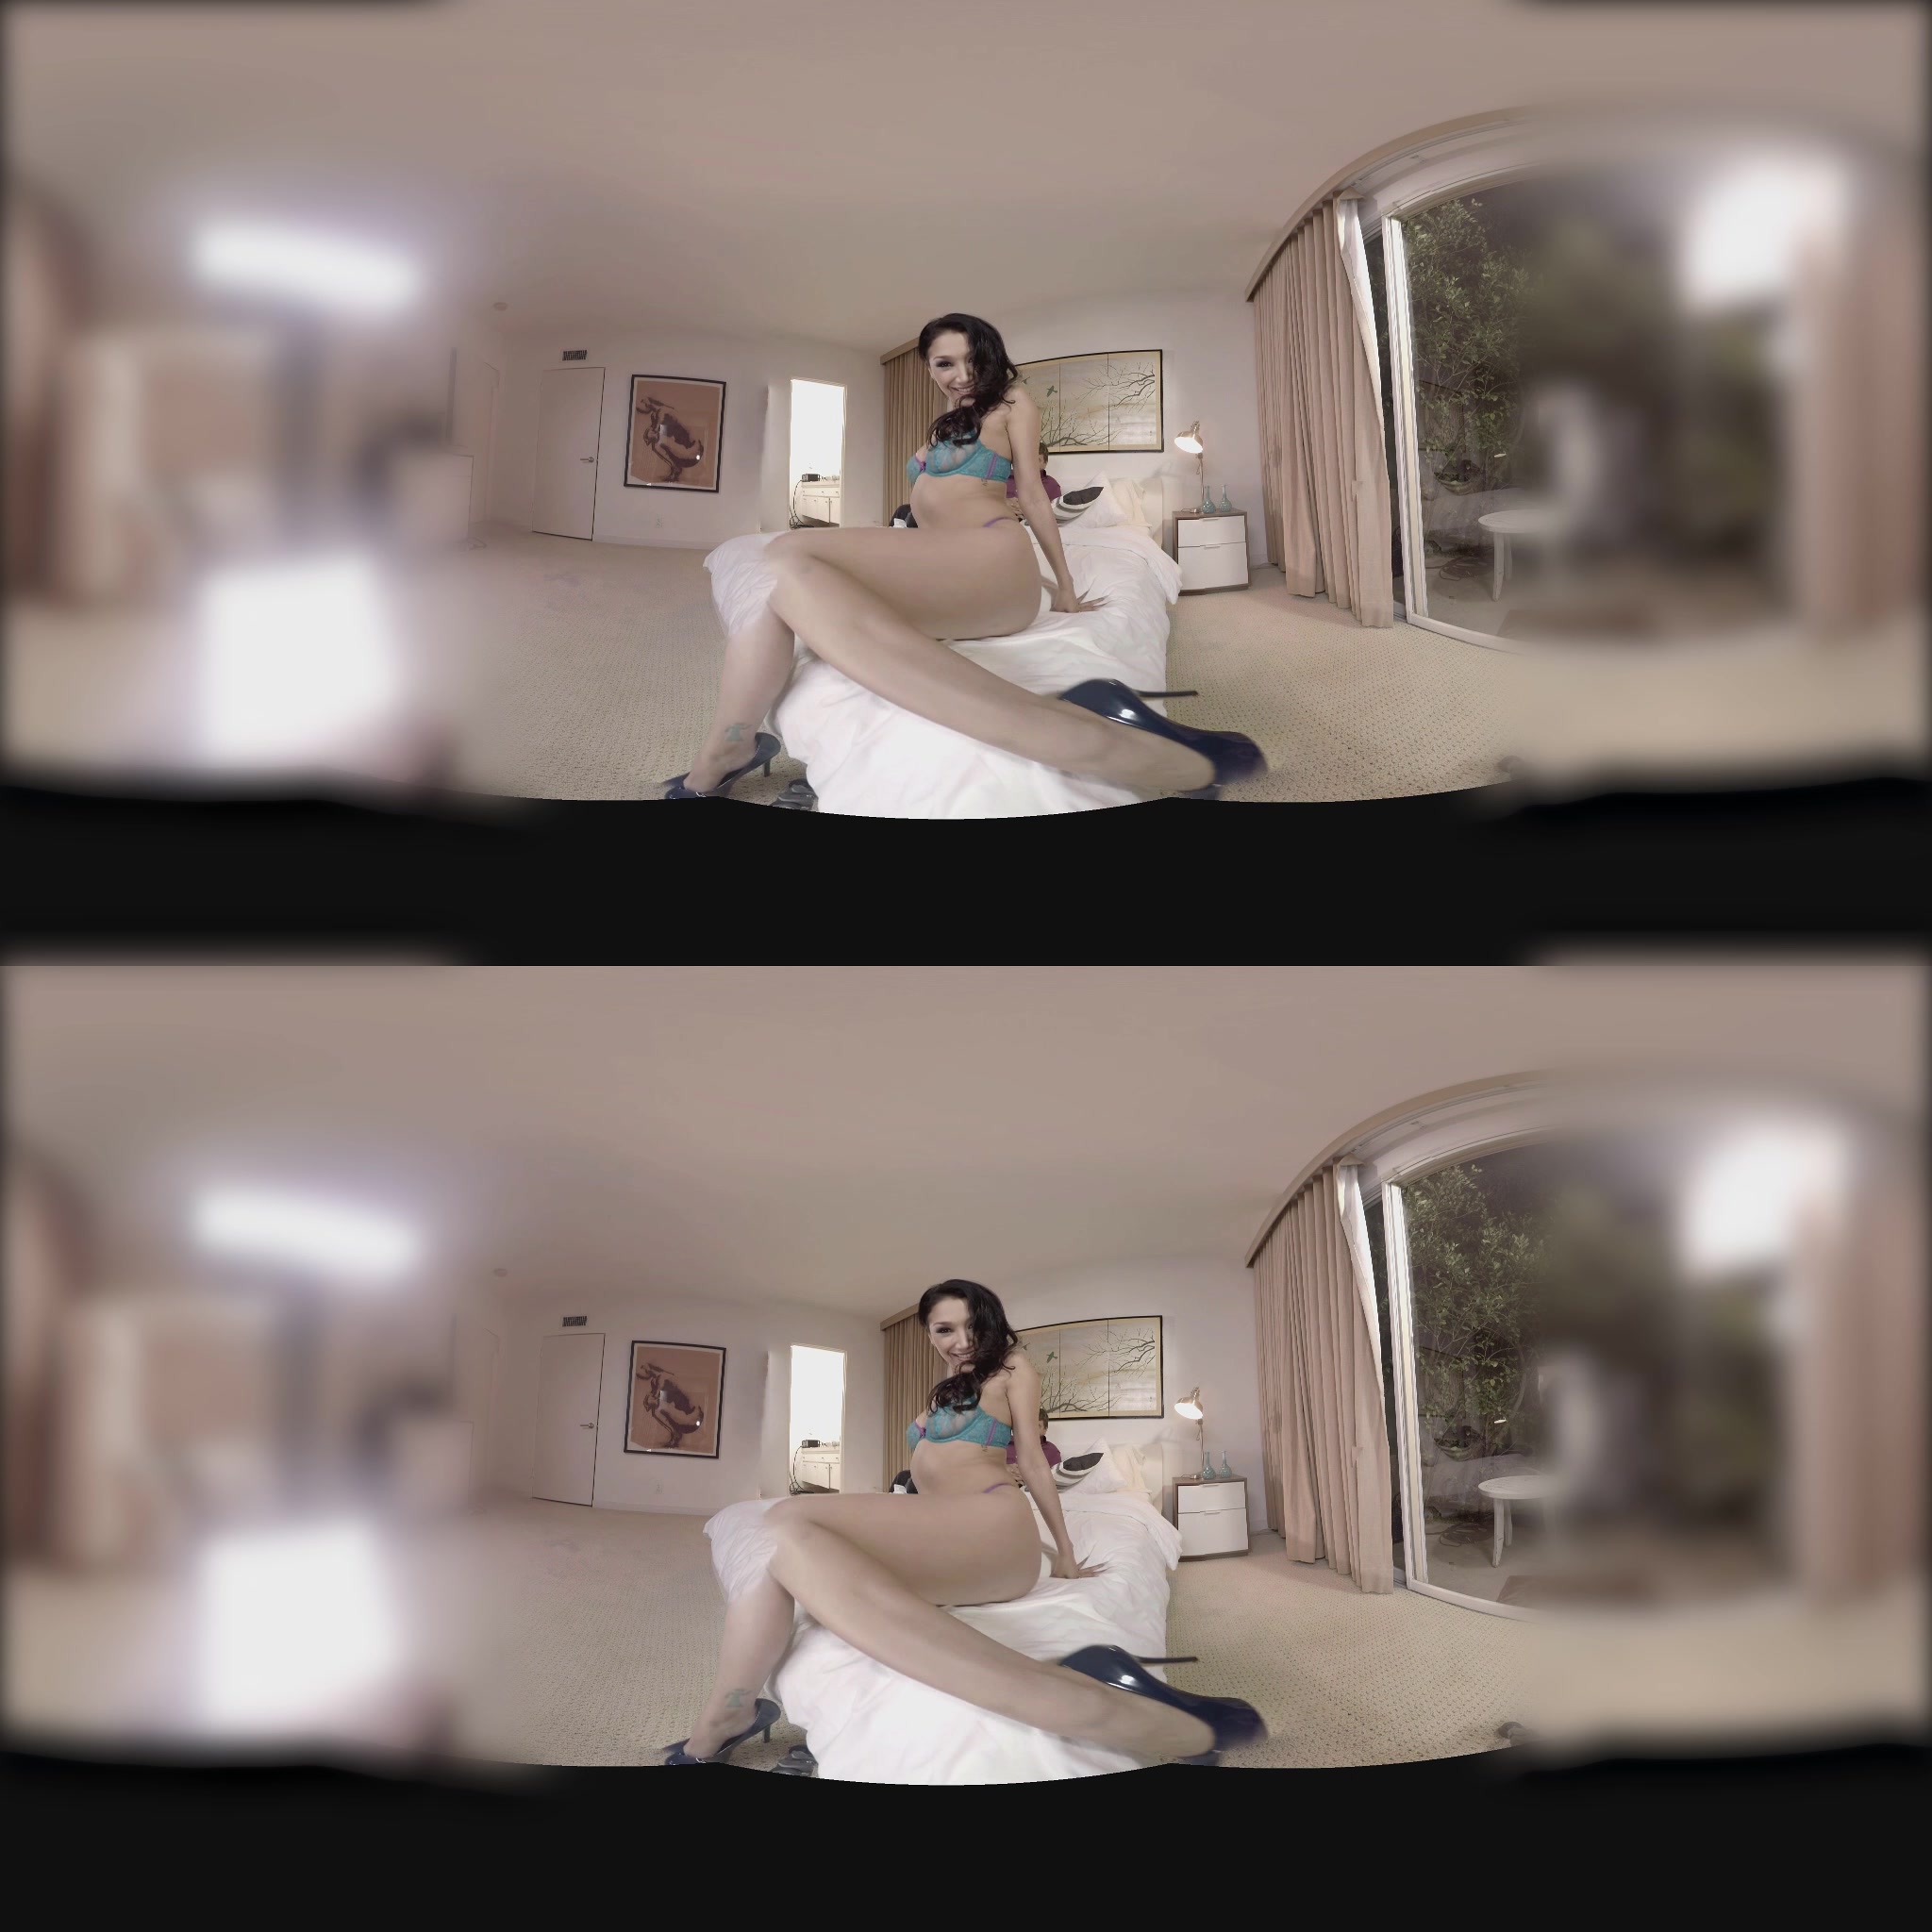 Vicki Chase gets anal treat in VR